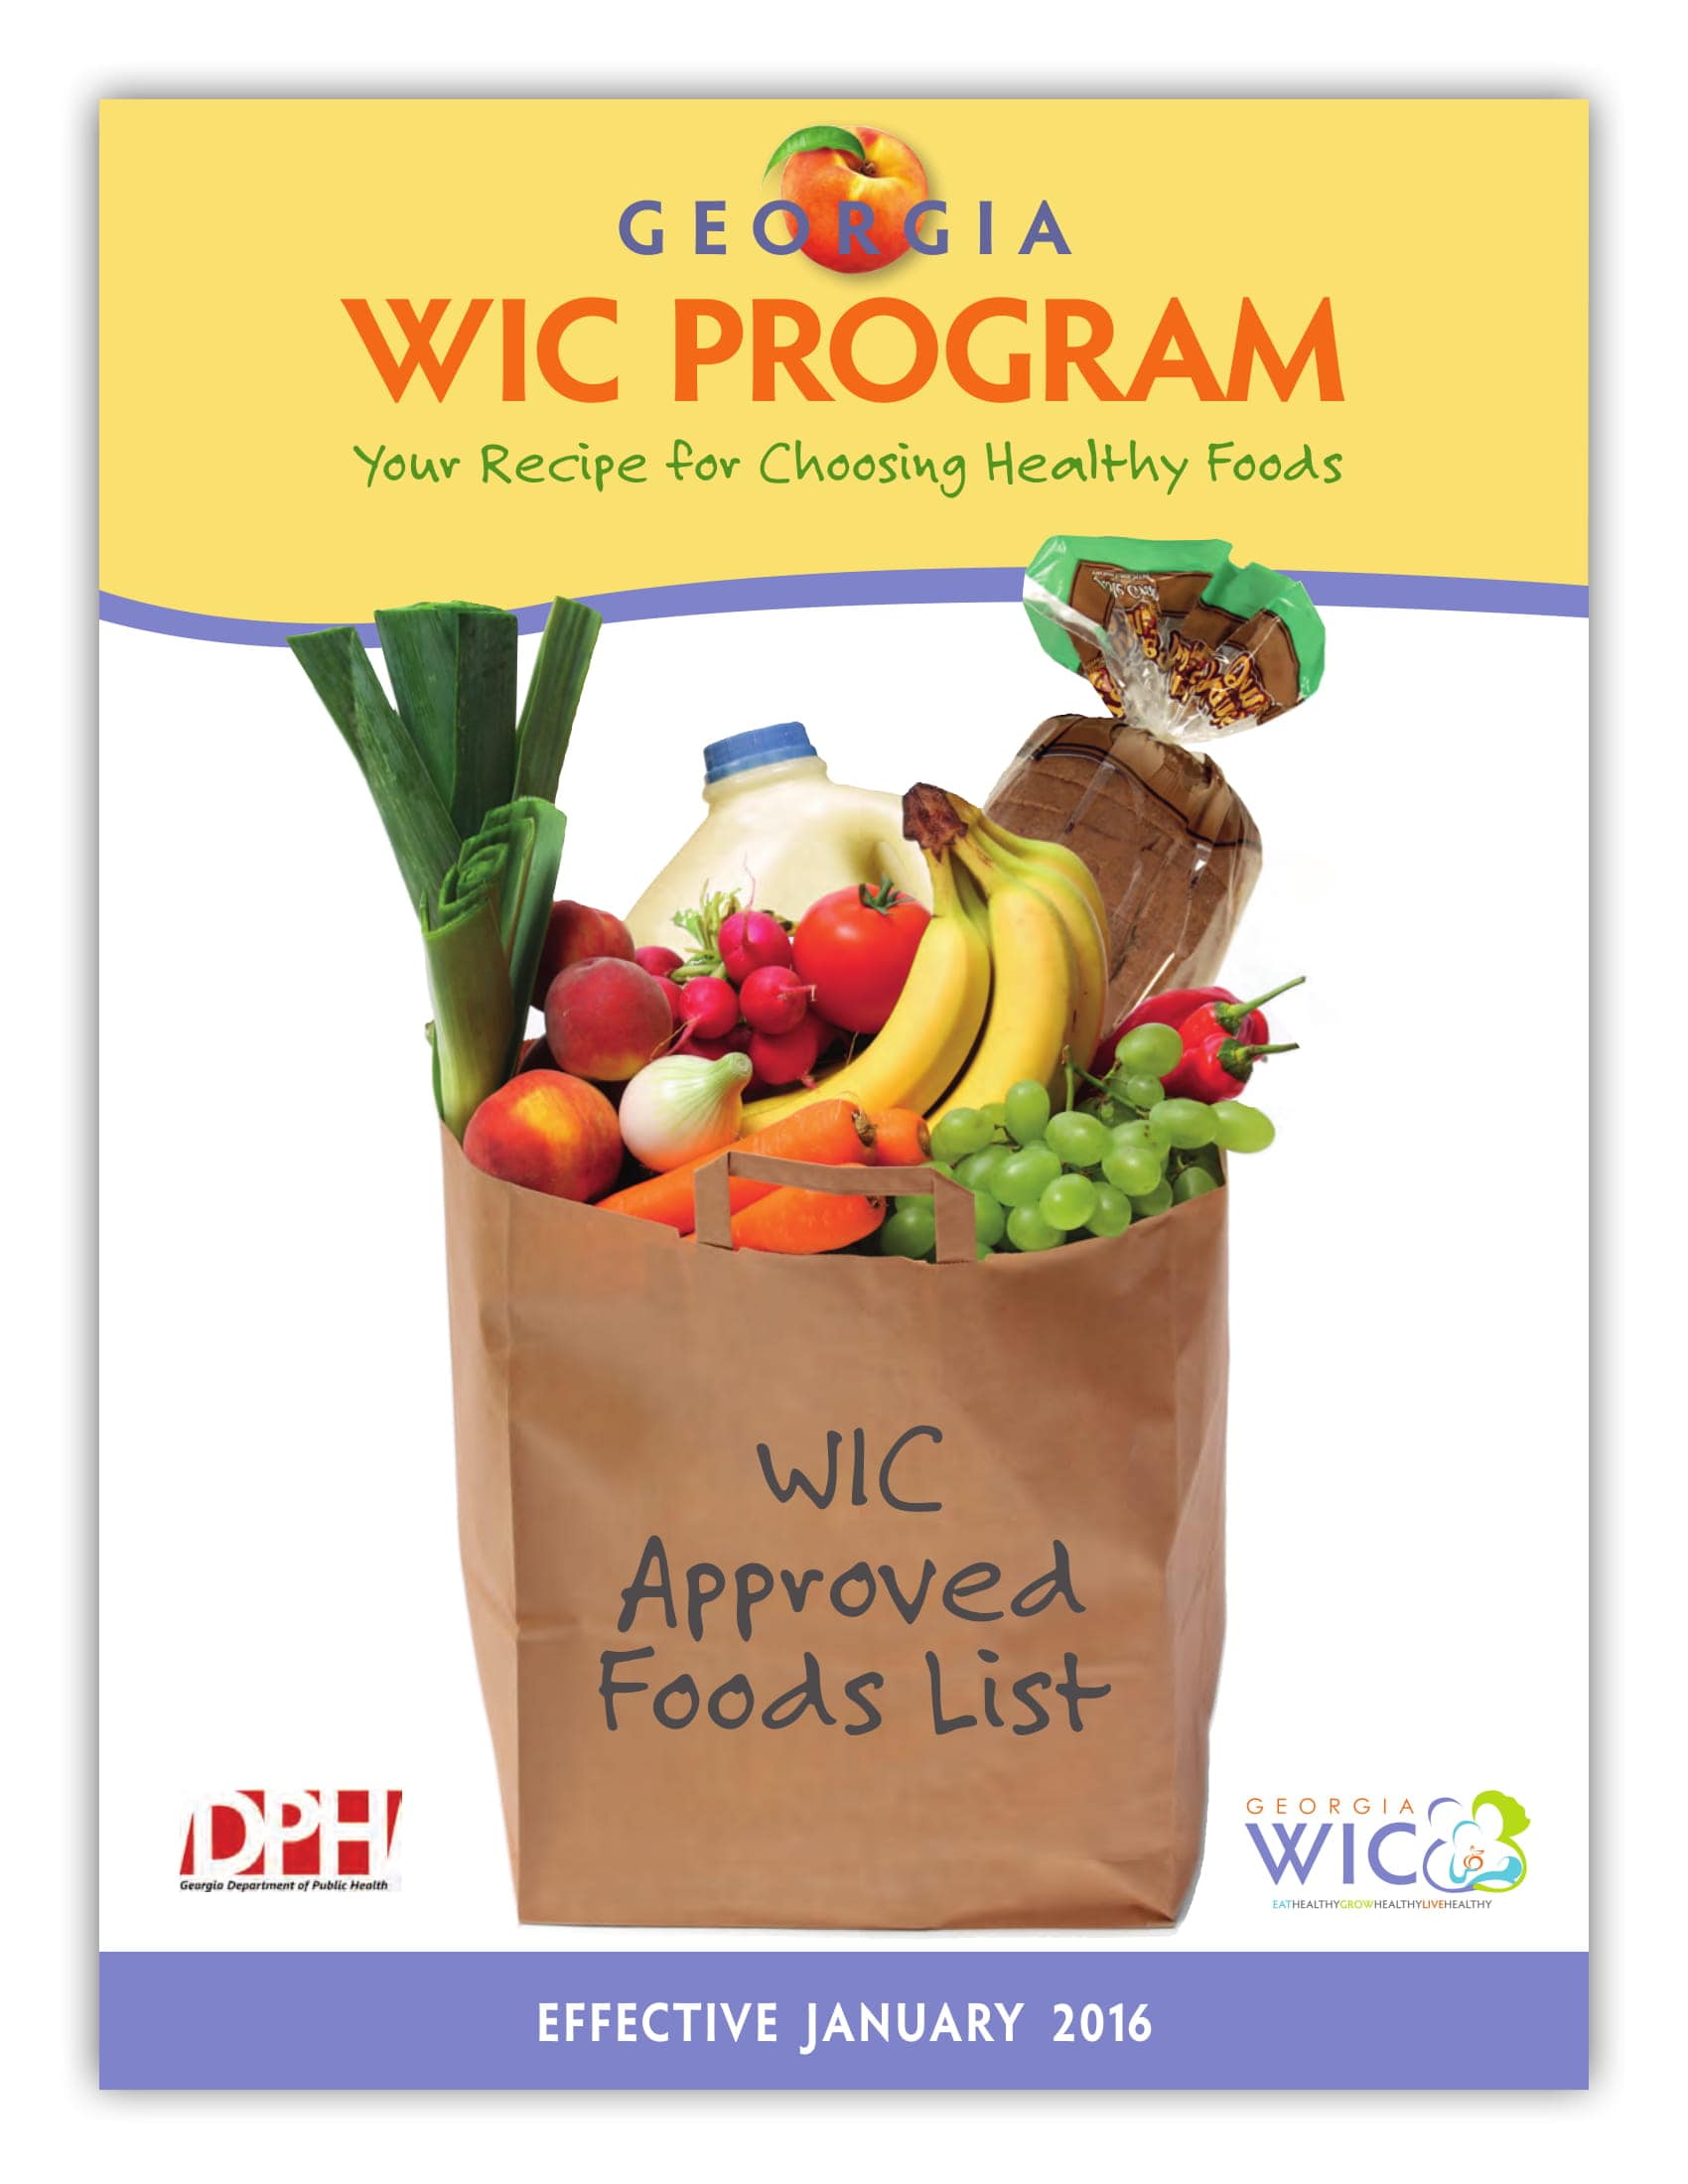 View the WIC Food List